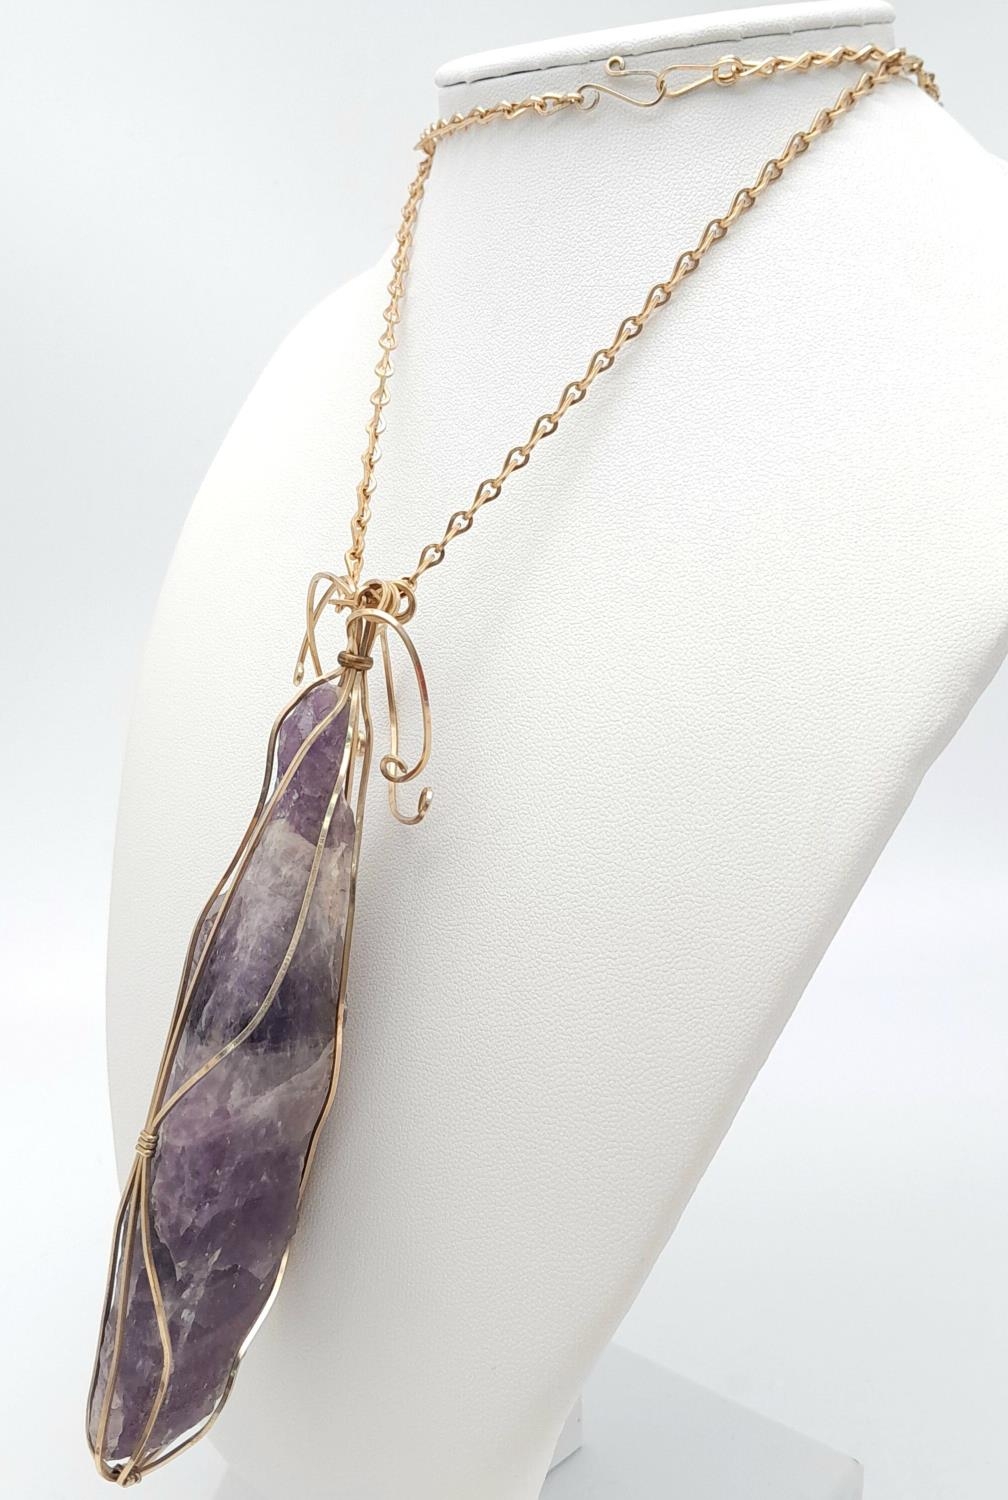 A Yellow metal amethyst geode large wire caged necklace with matching earrings with non-pierced - Image 2 of 5